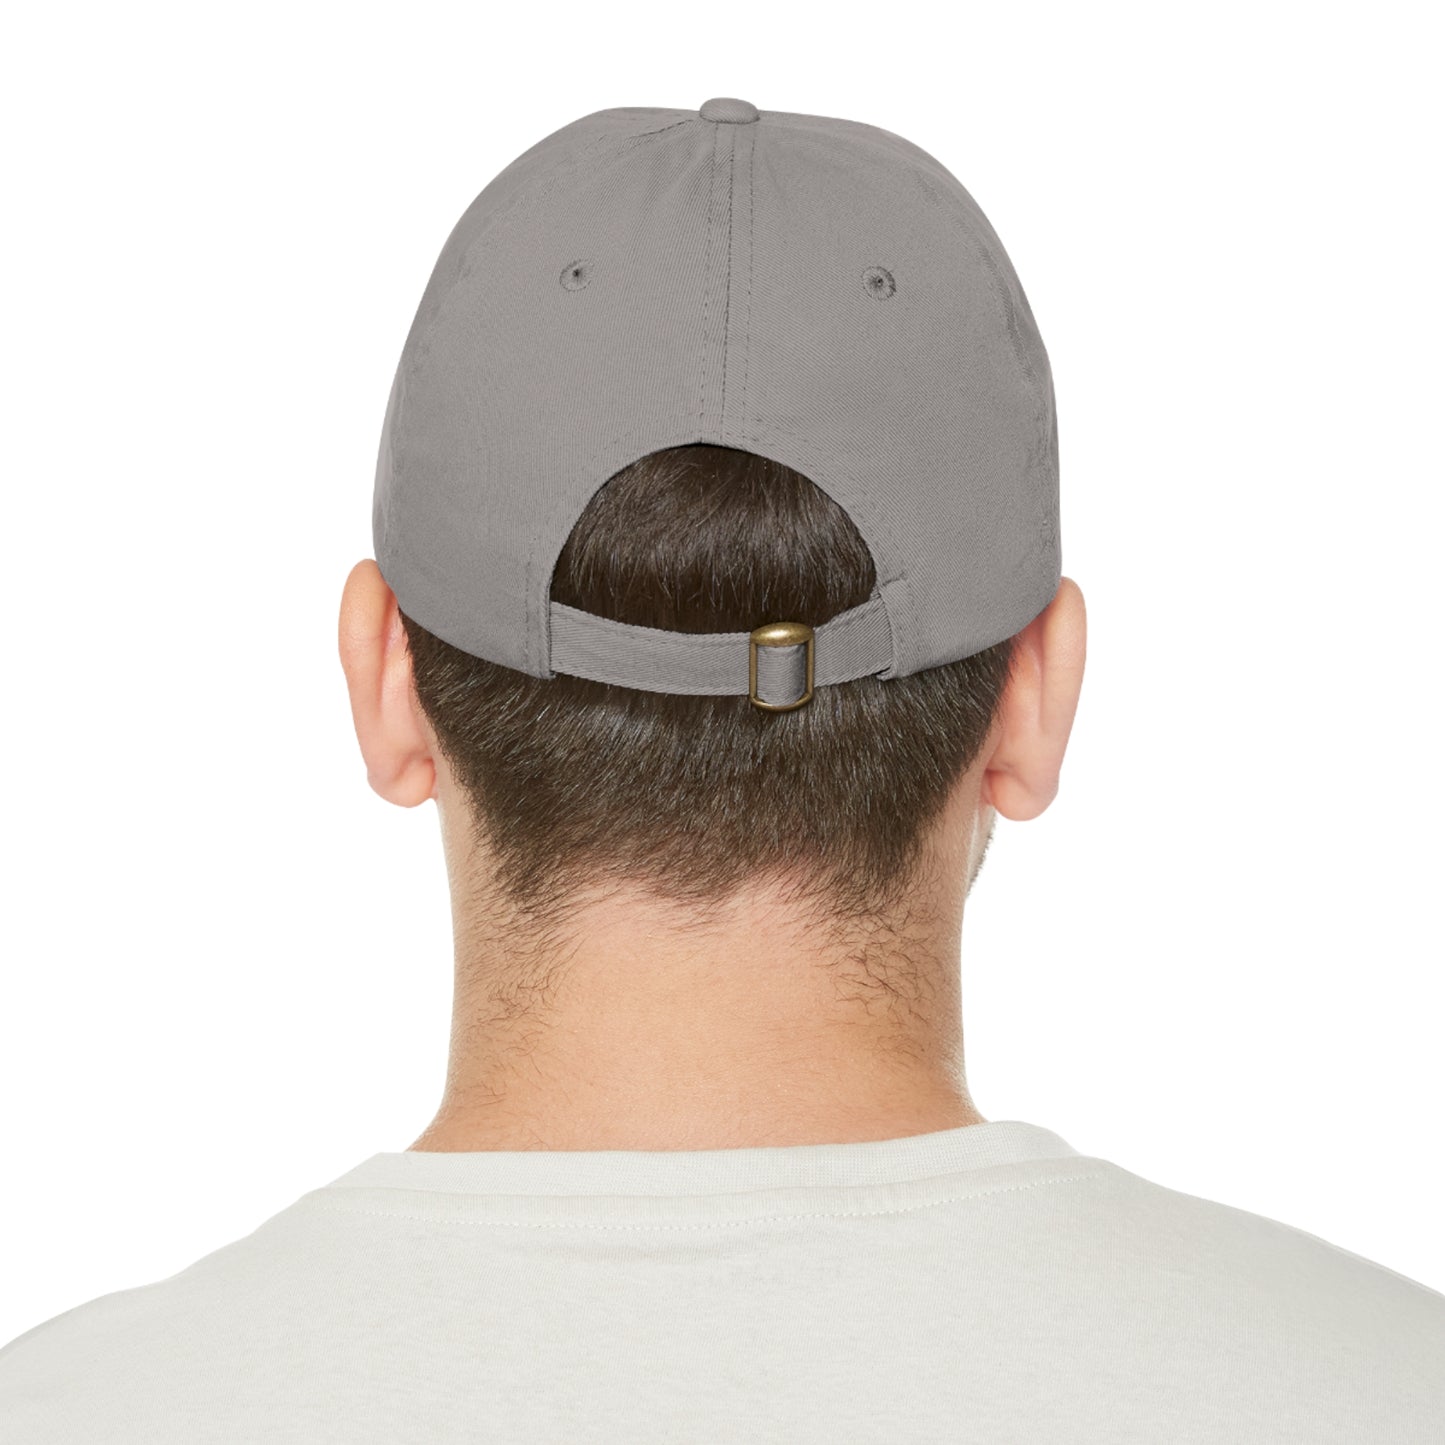 Nope. Not Today - Dad Hat with Leather Patch (Rectangle)